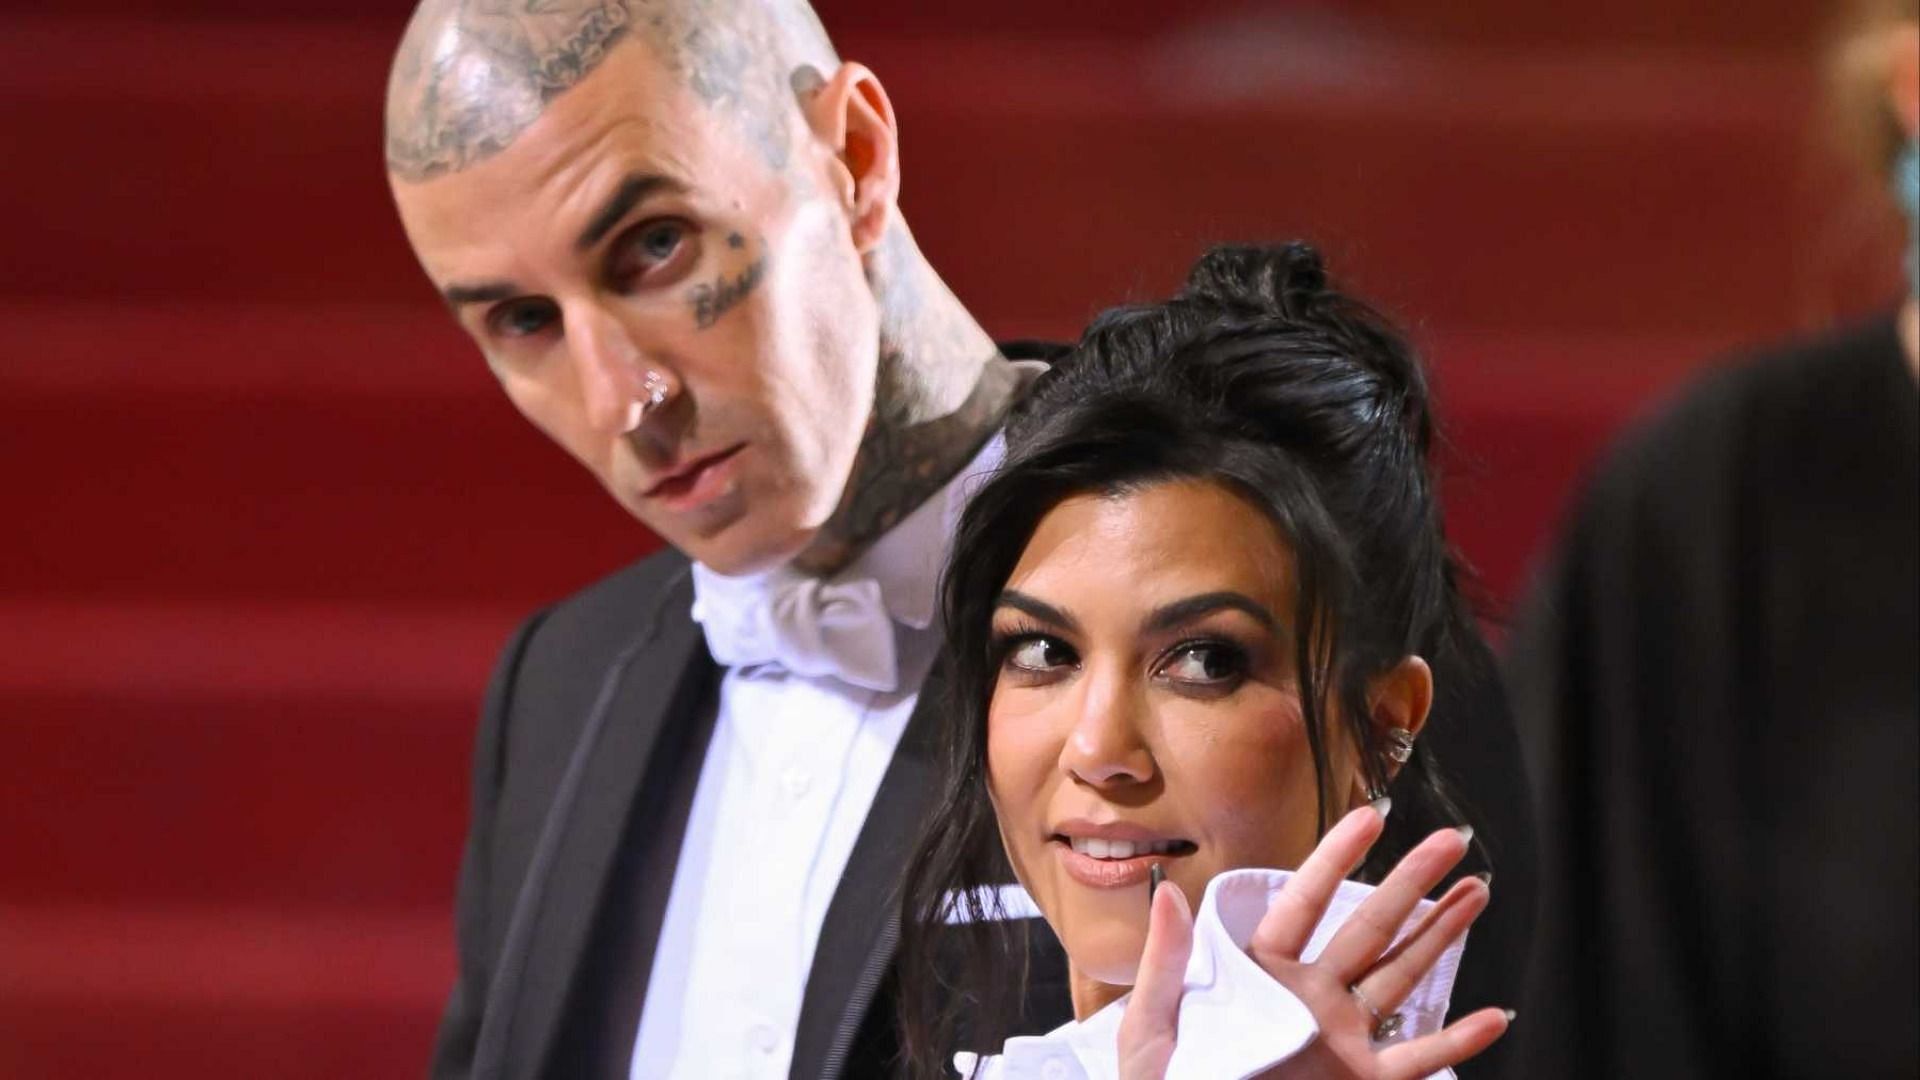 Kourtney Kardashian and Travis Barker tied the knot second time on May 22 in the presence of their friends and family. (Image via Getty Images/NDZ/Star Max)